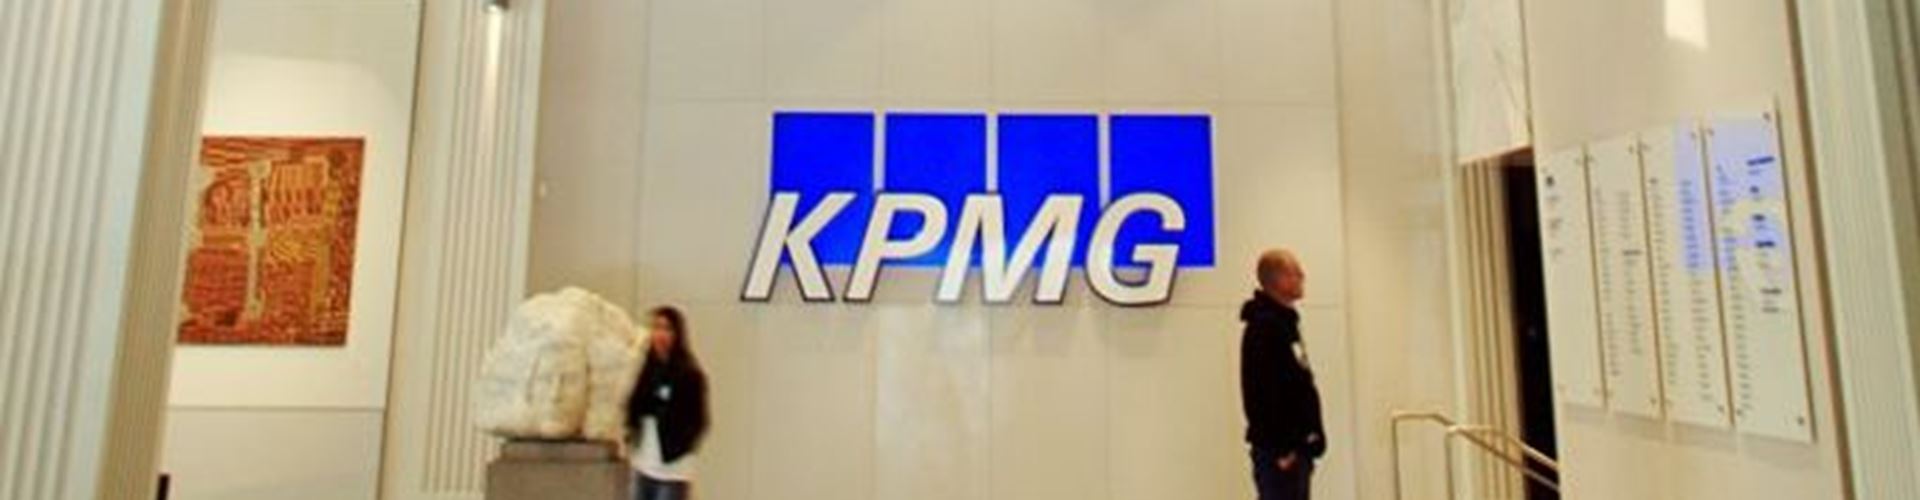 KPMG Enterprise to help small businesses receive accountancy support